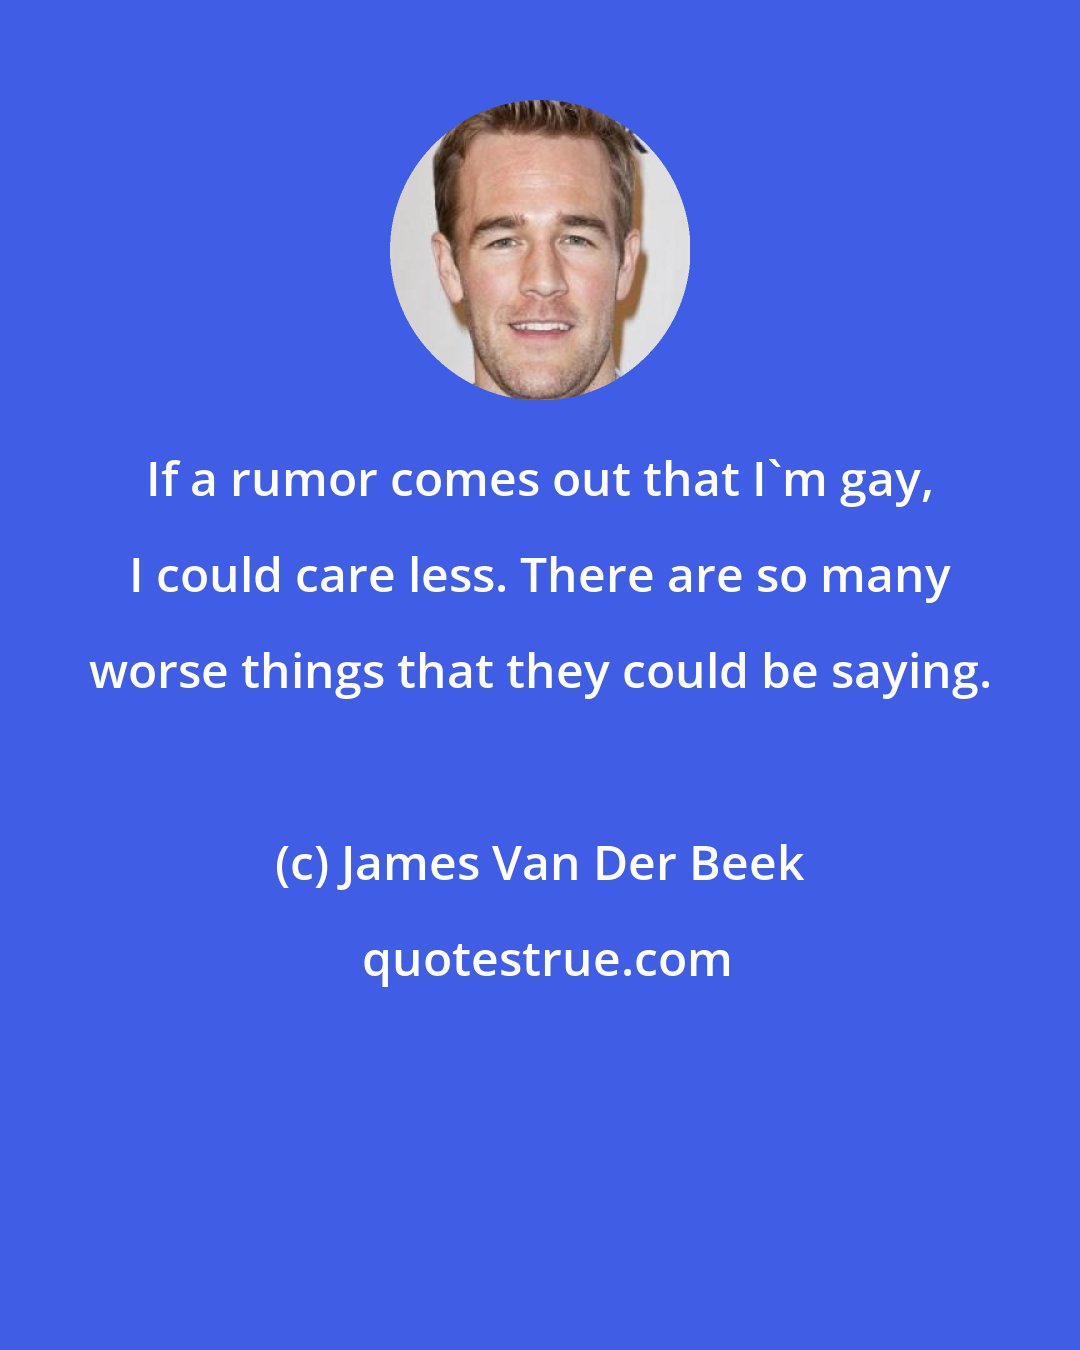 James Van Der Beek: If a rumor comes out that I'm gay, I could care less. There are so many worse things that they could be saying.